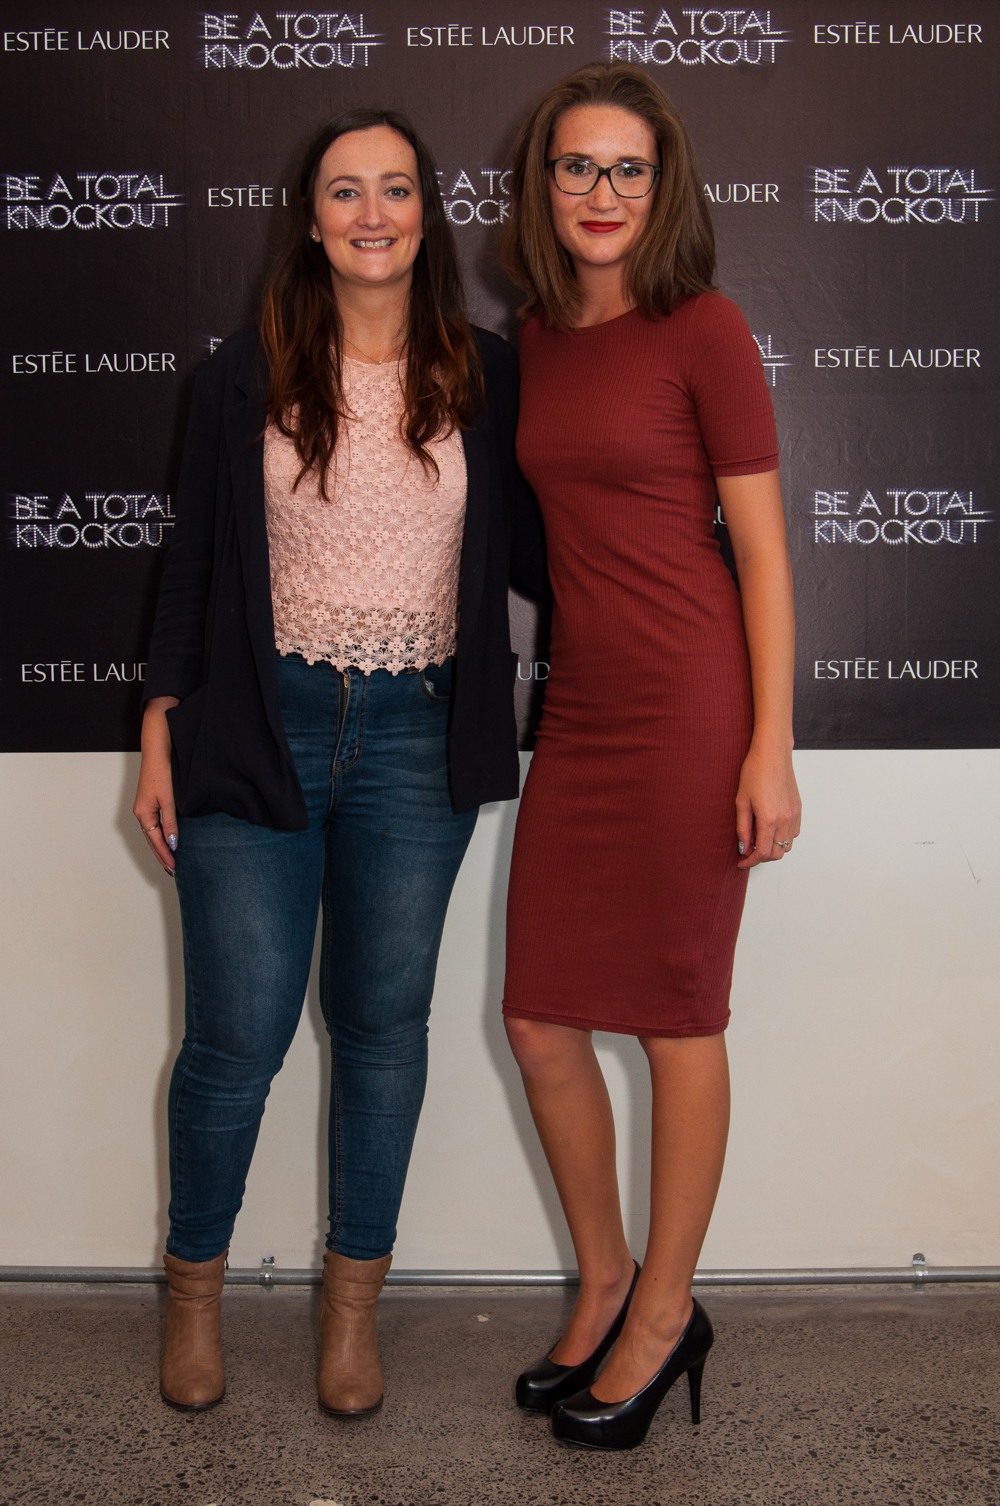 Guests at the FQ and Estée Lauder presents: An evening with Kendall Jenner's makeup artist Victor Henao event.